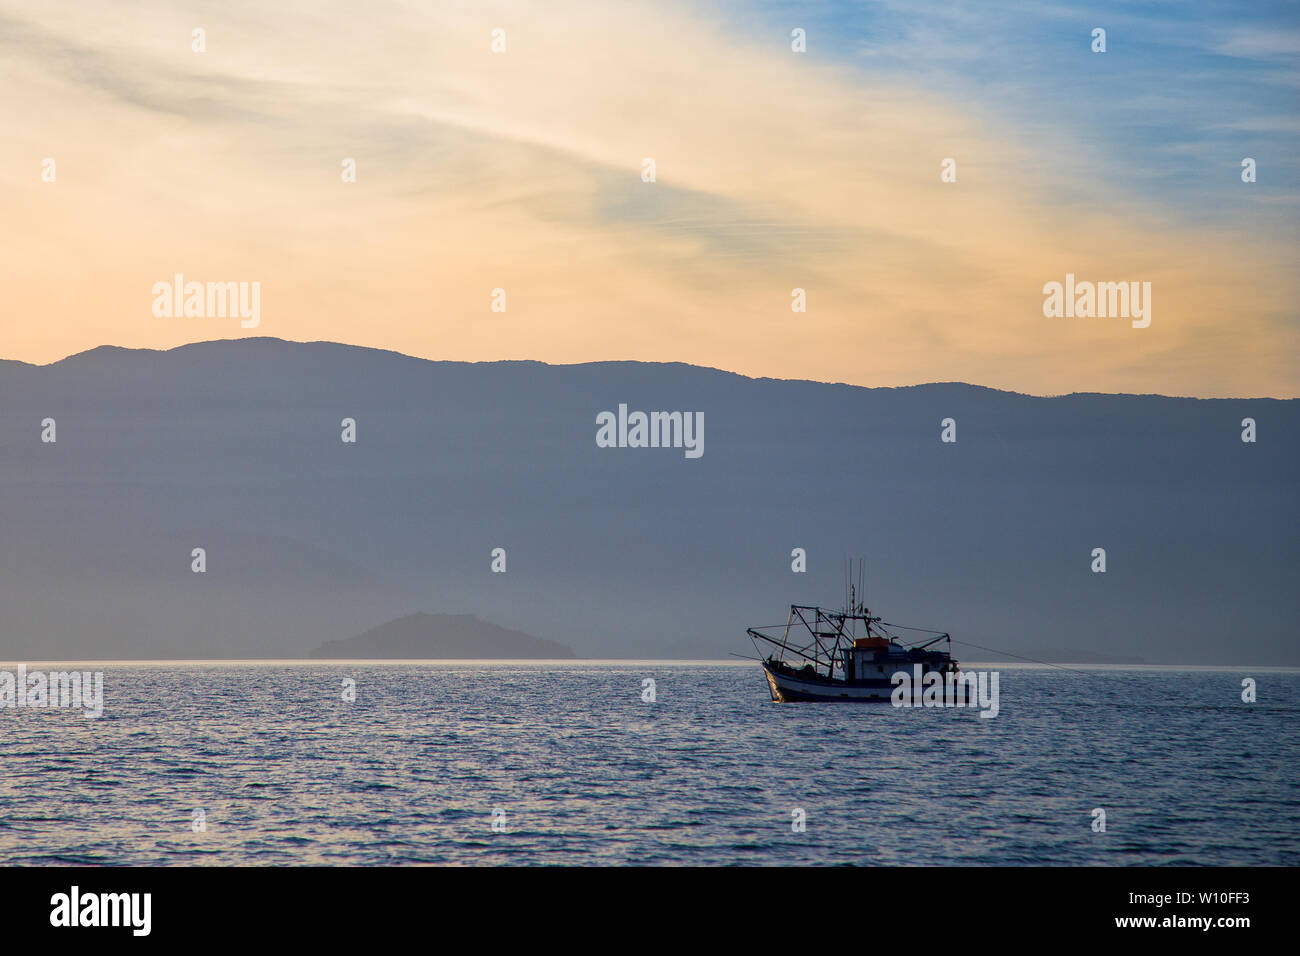 Solitary fishing boat navigating a generic sea with mountains skyline as background Stock Photo